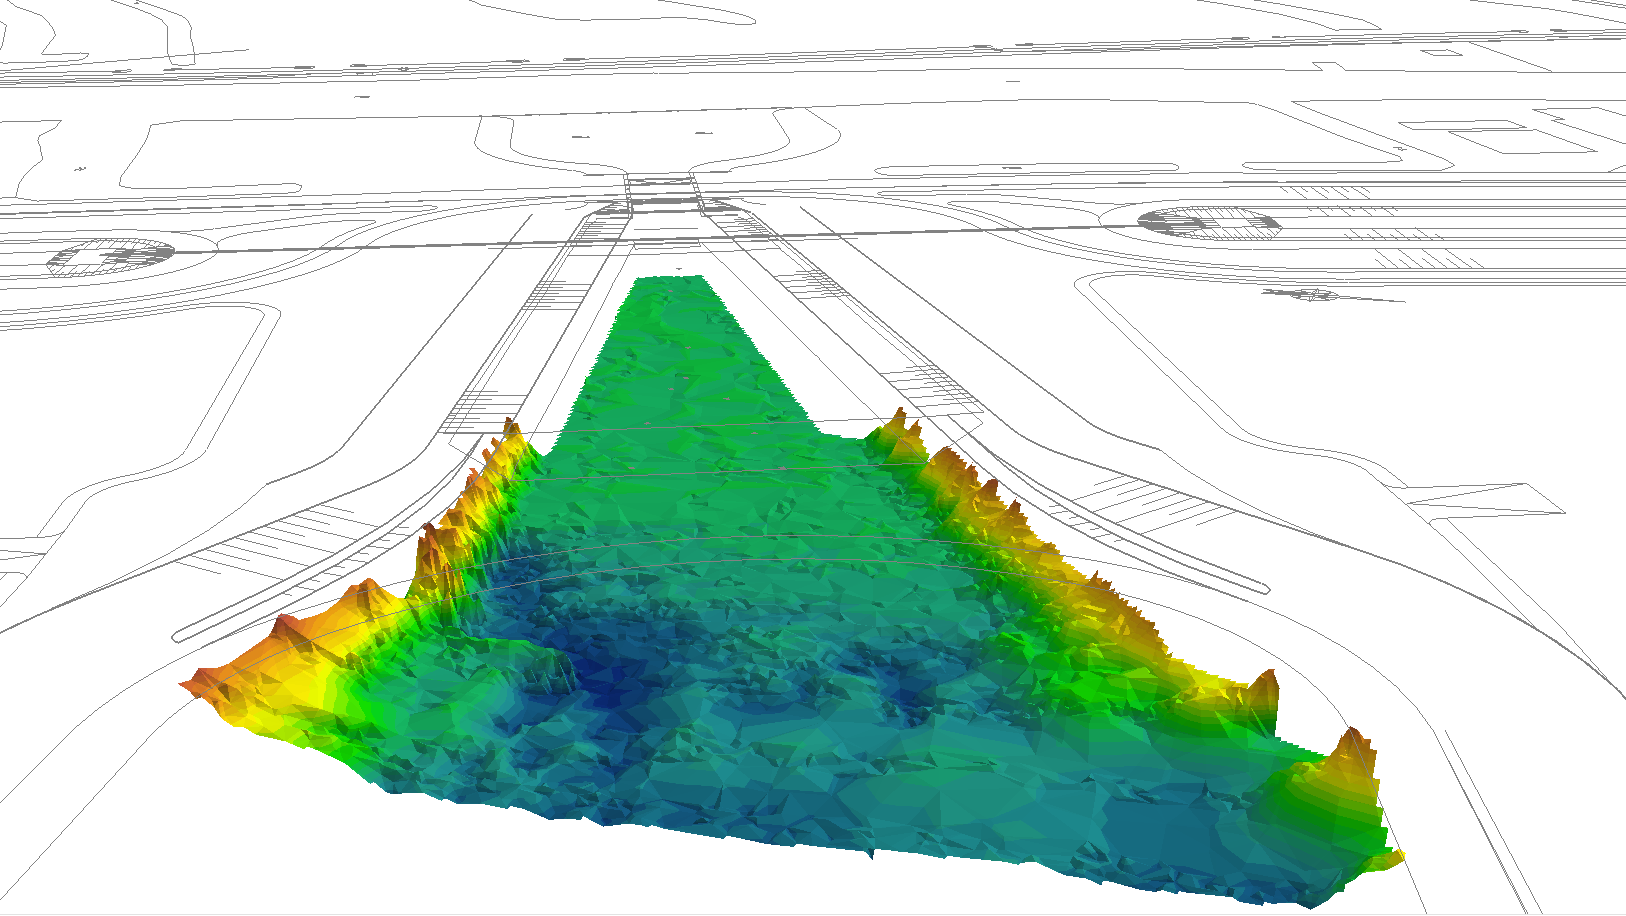 Current and erosion measurements for inlet design verification